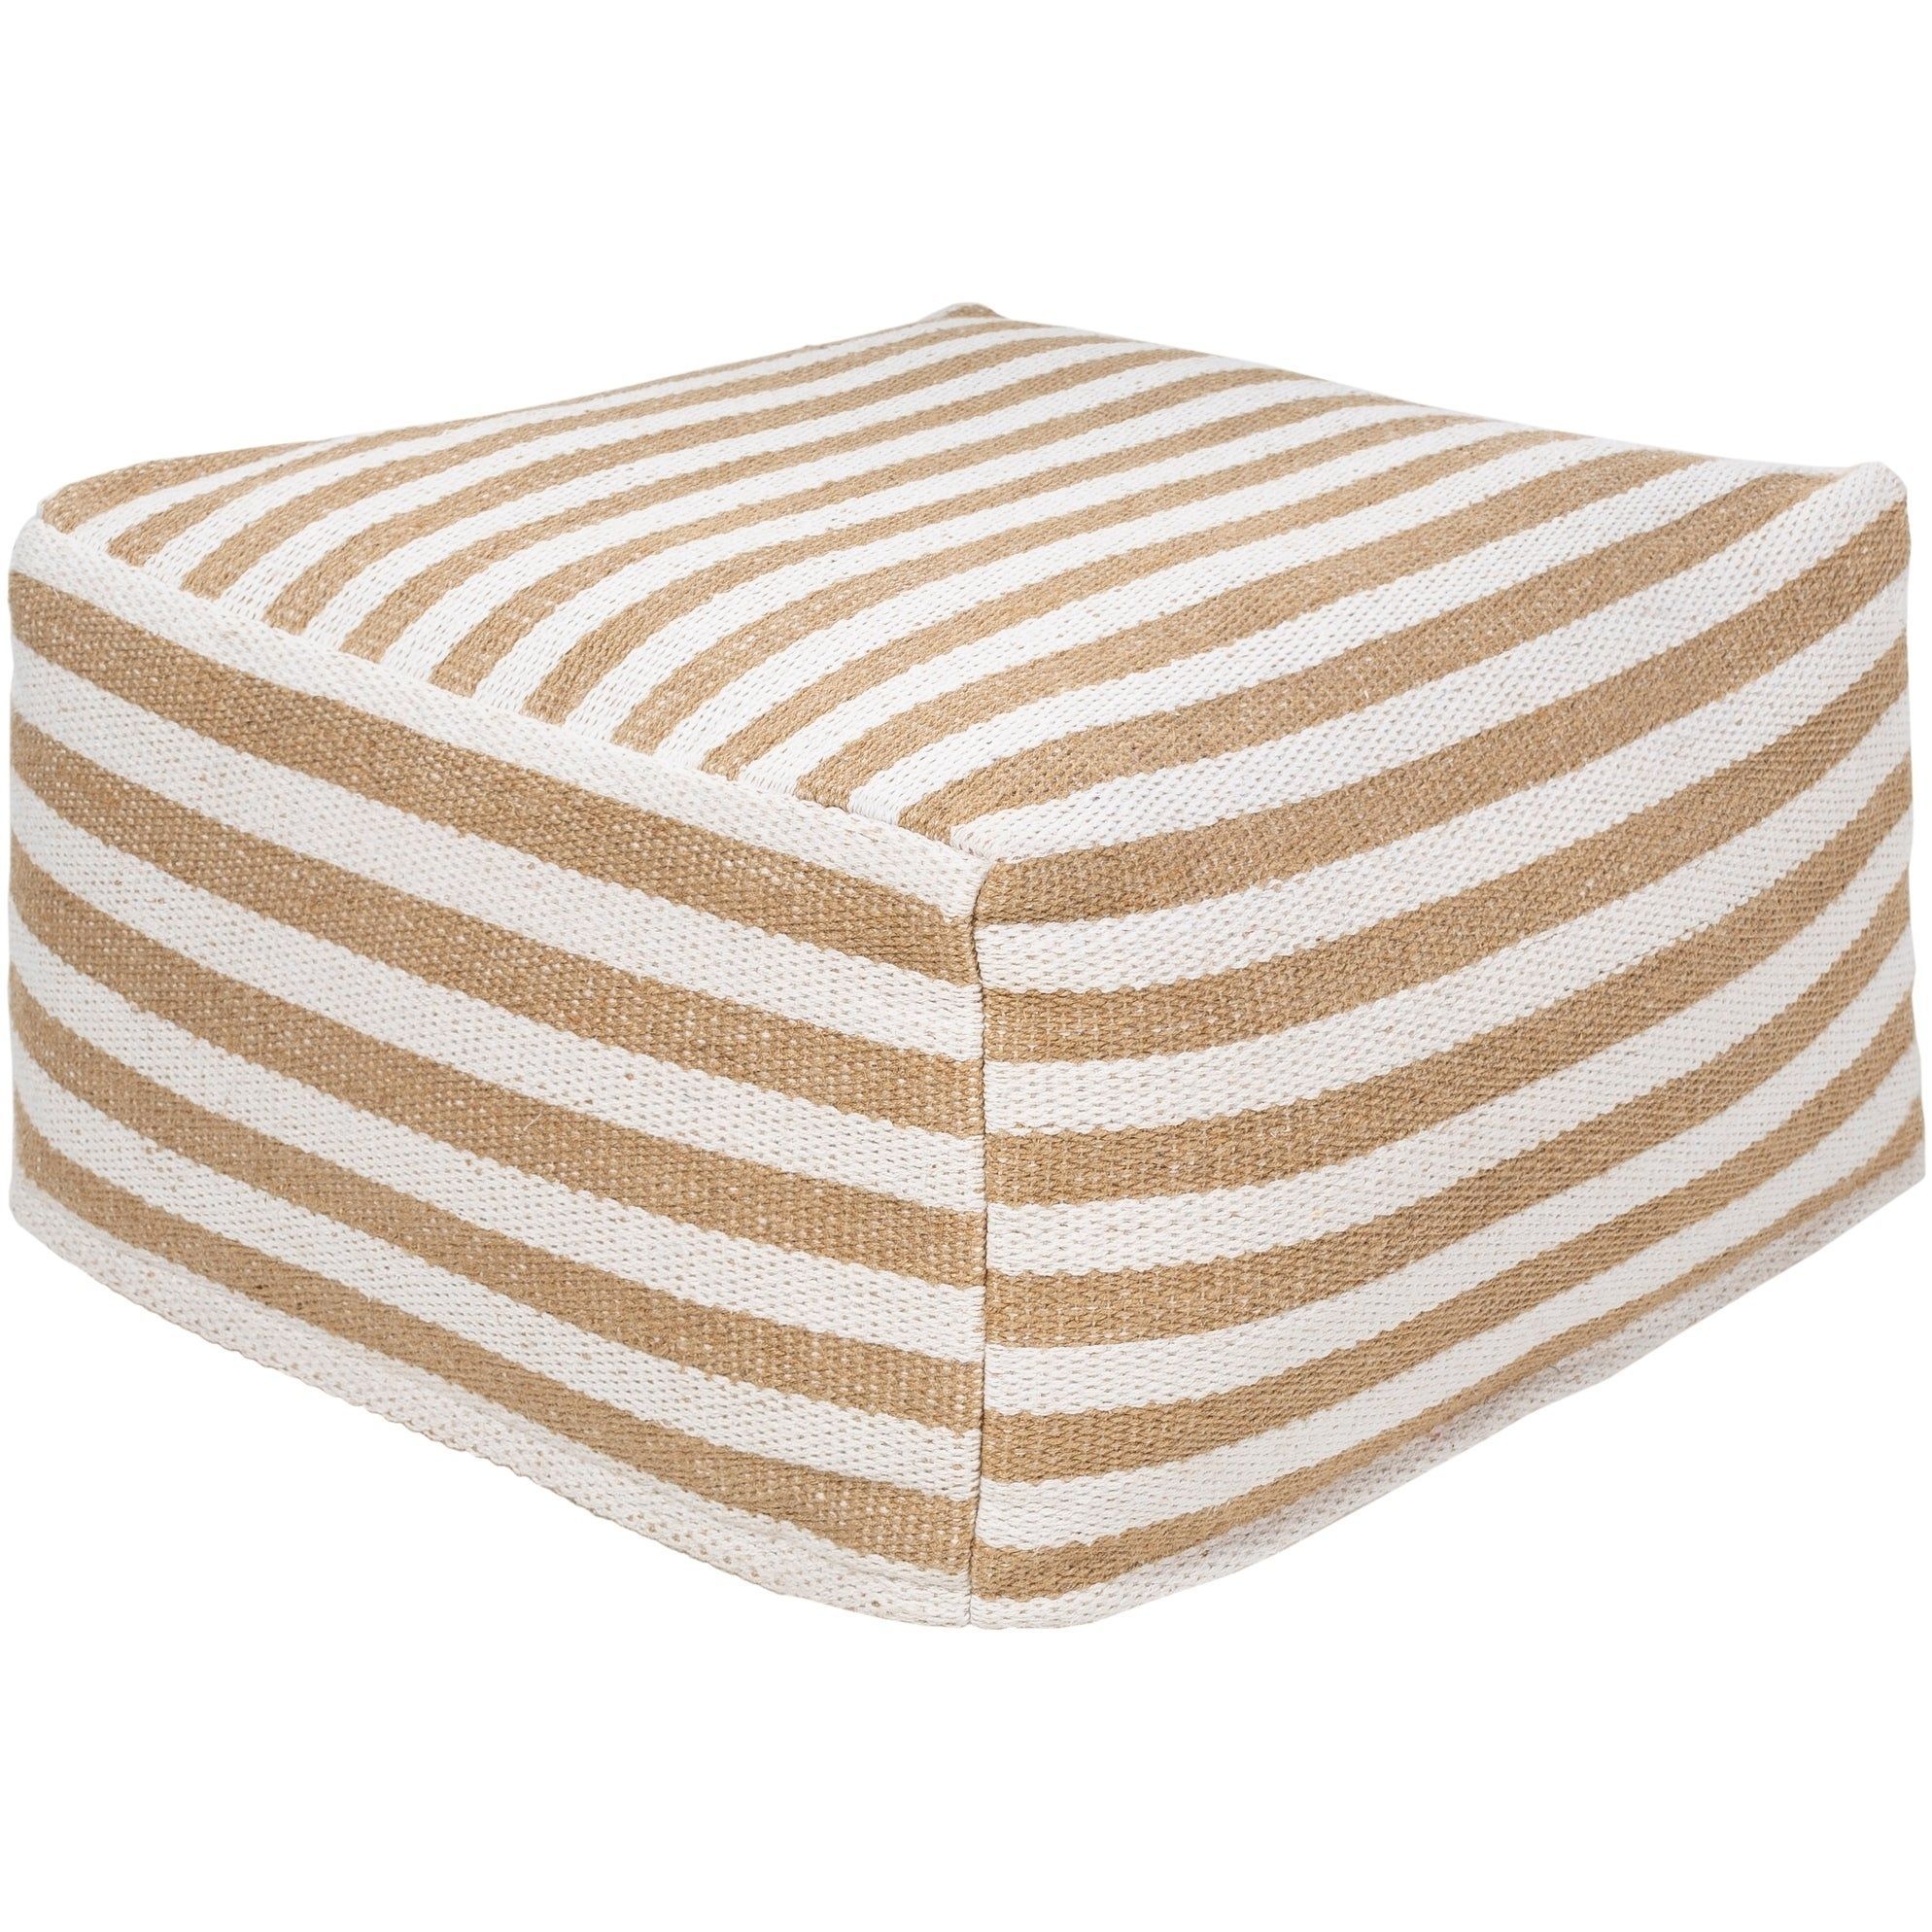 Overstock: Online Shopping – Bedding, Furniture, Electronics With Regard To Beige Trellis Cylinder Pouf Ottomans (View 6 of 20)